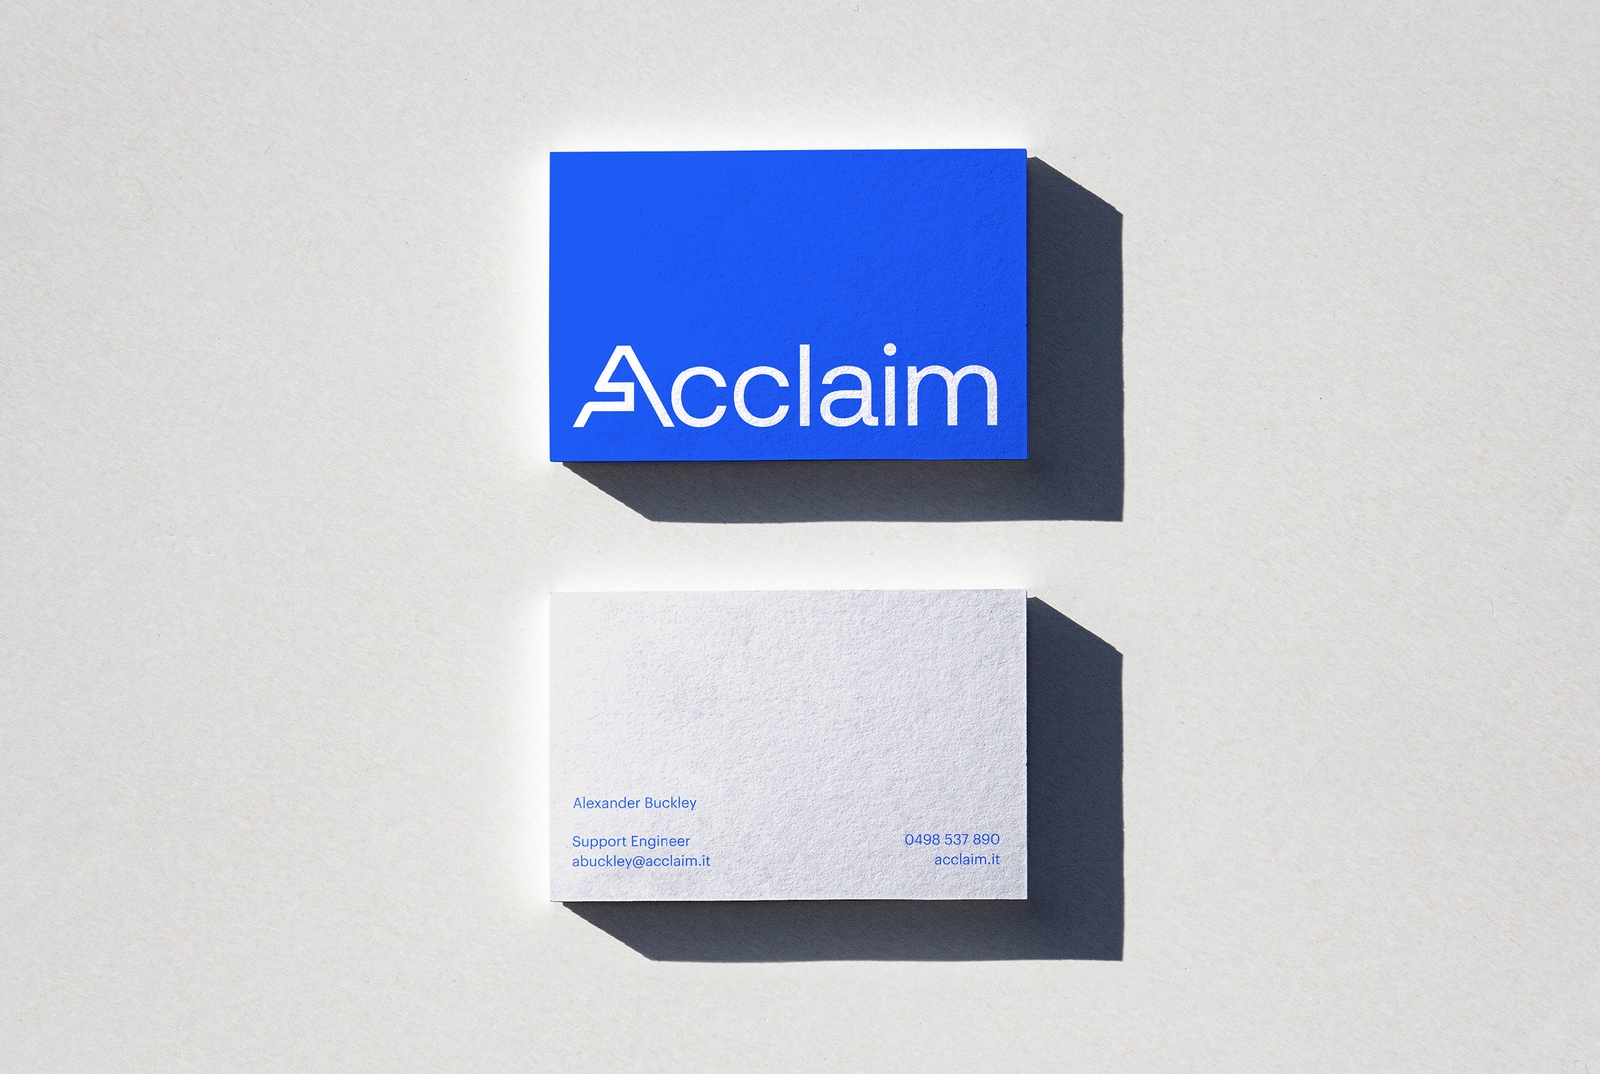 AccliamIT - Brand and Website - IT Solutions Business Card Mockup | Atollon - a design company